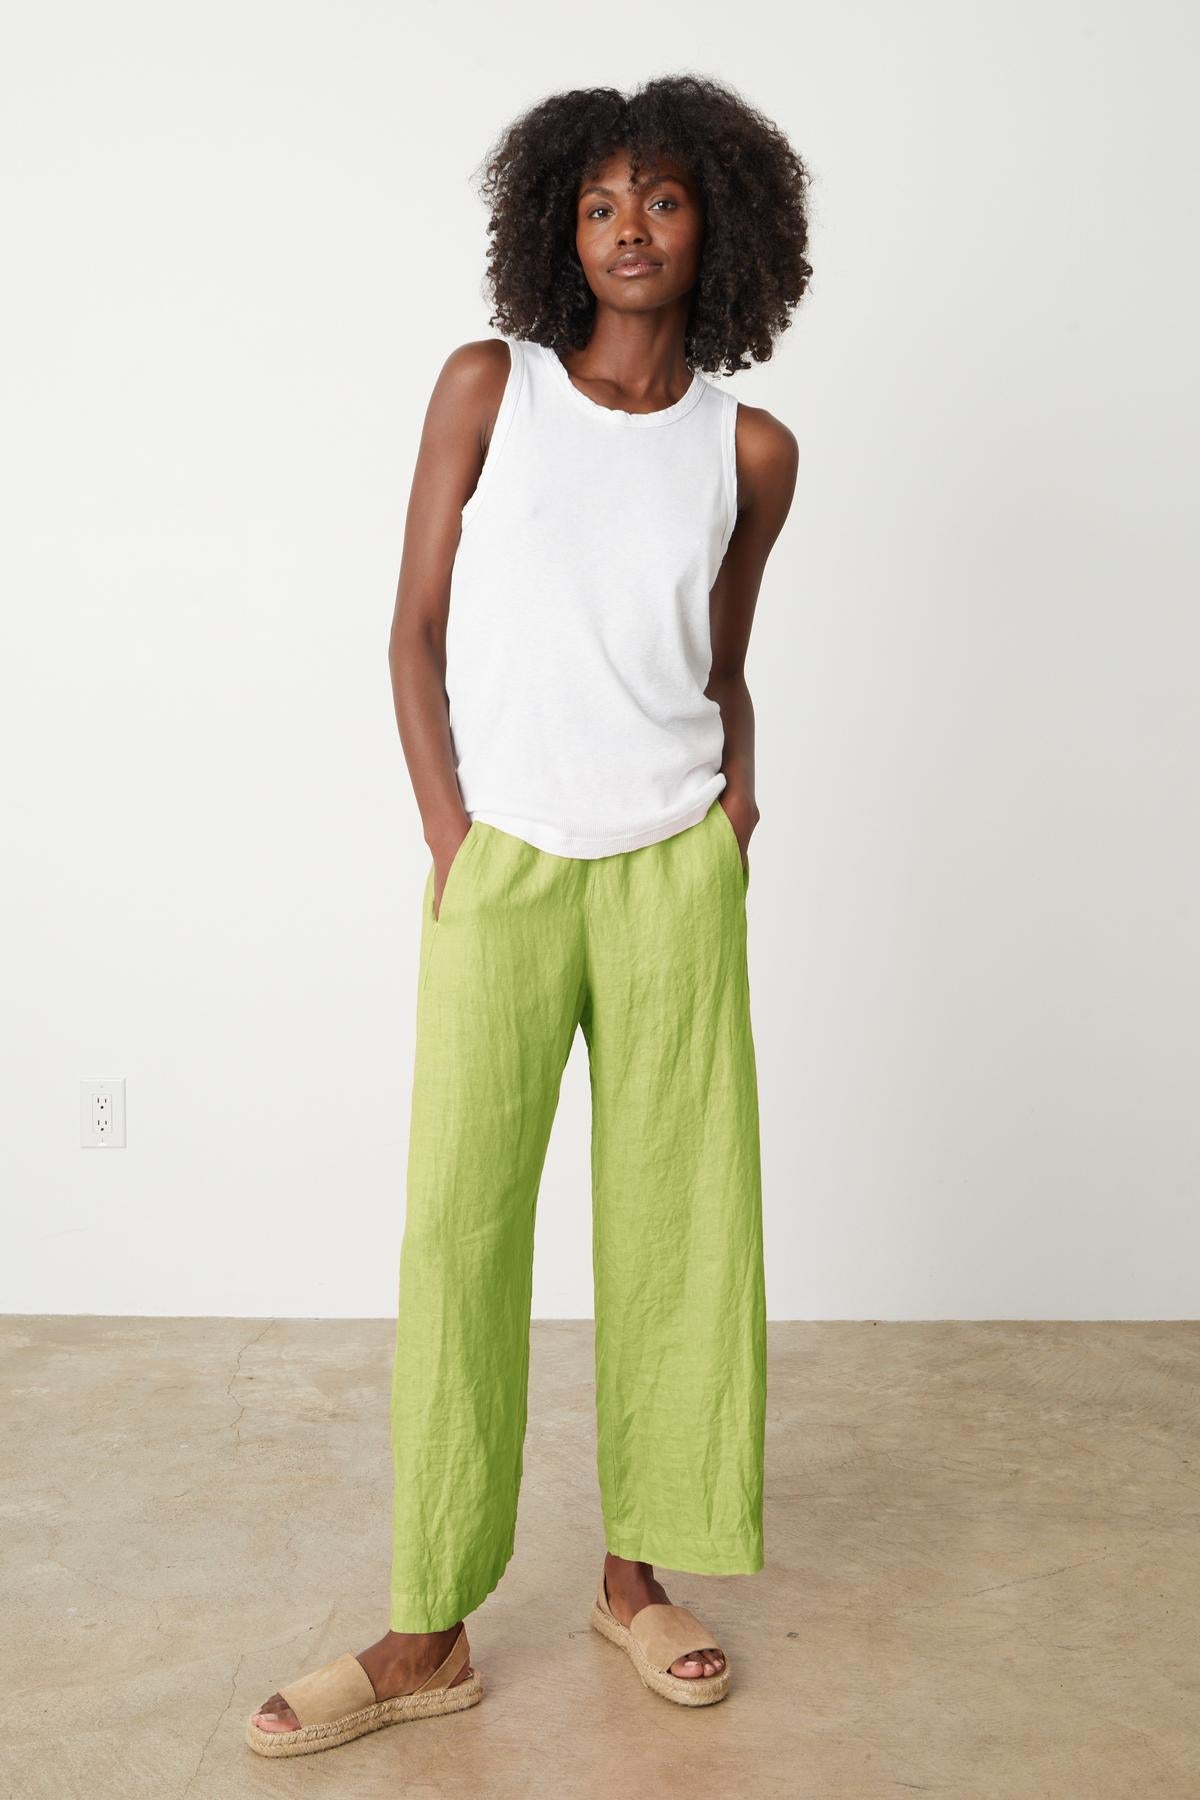   Lola pant in kiwi green colored linen with Maxie tank in white full length front 